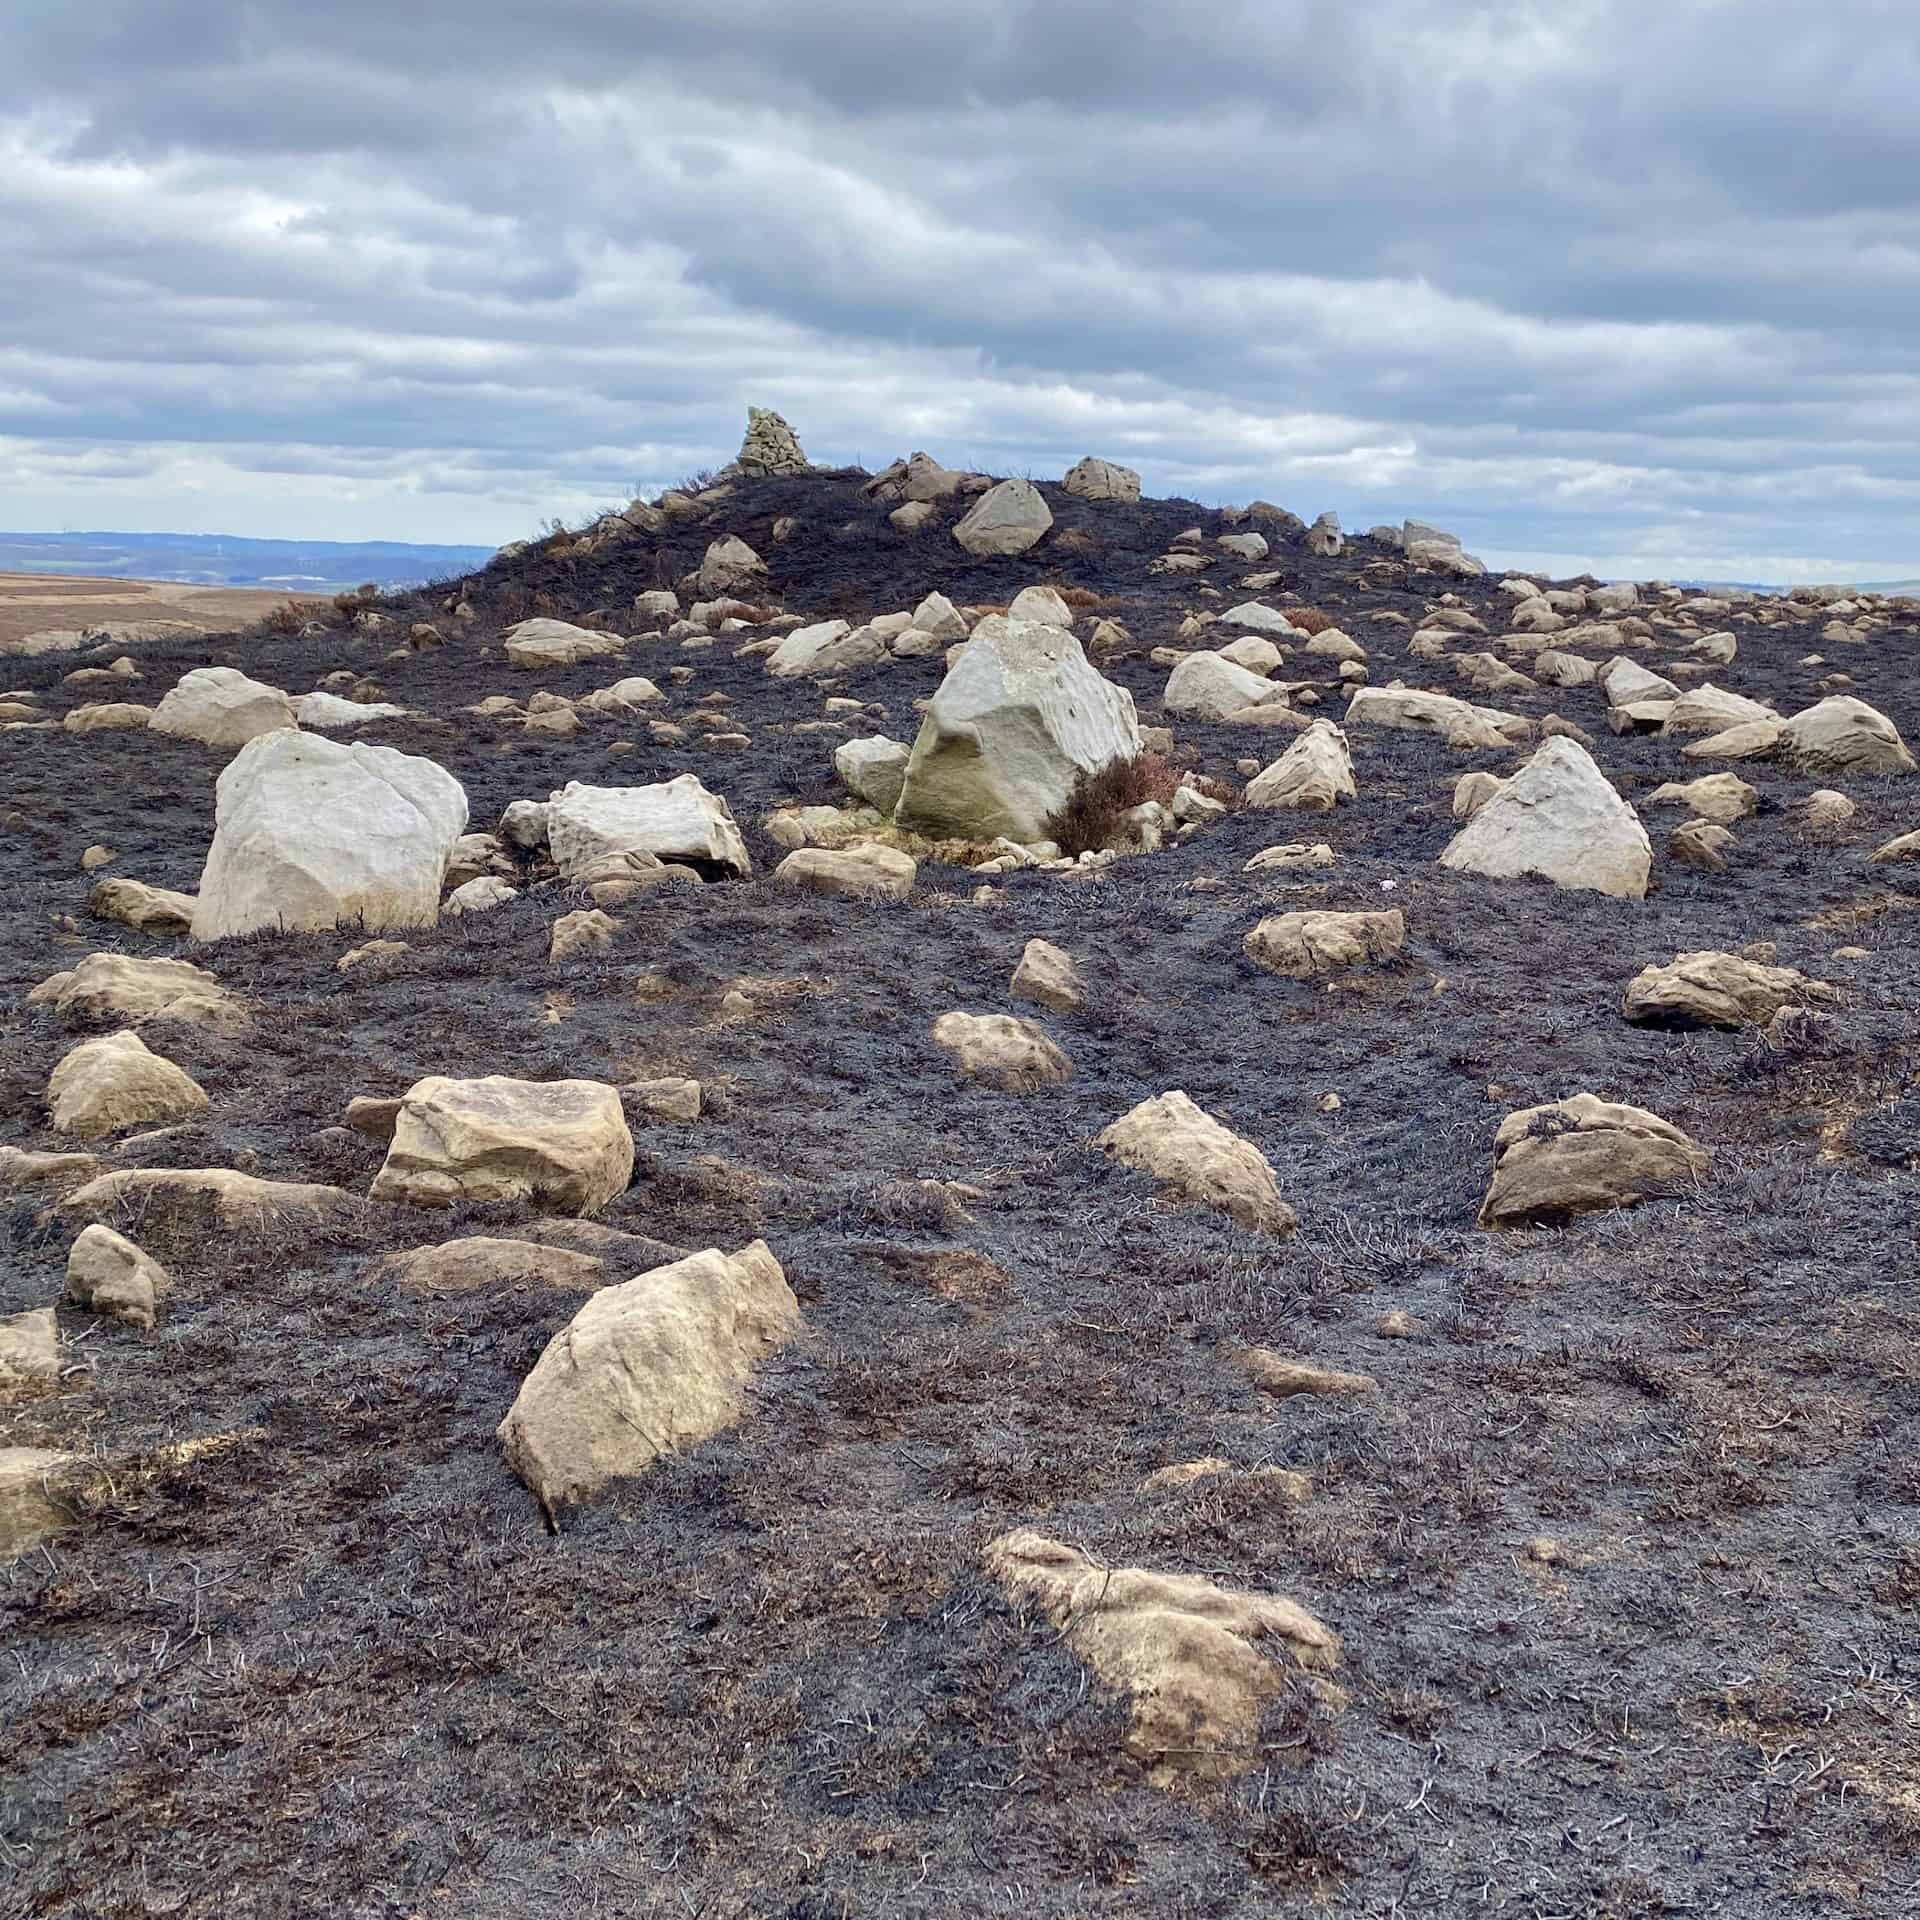 Stony Hill, looking like a moonscape because of the surrounding burnt heather. Managed heather burning normally takes place over the winter and in early spring when there are no birds nesting on the ground and the soil is generally wet.